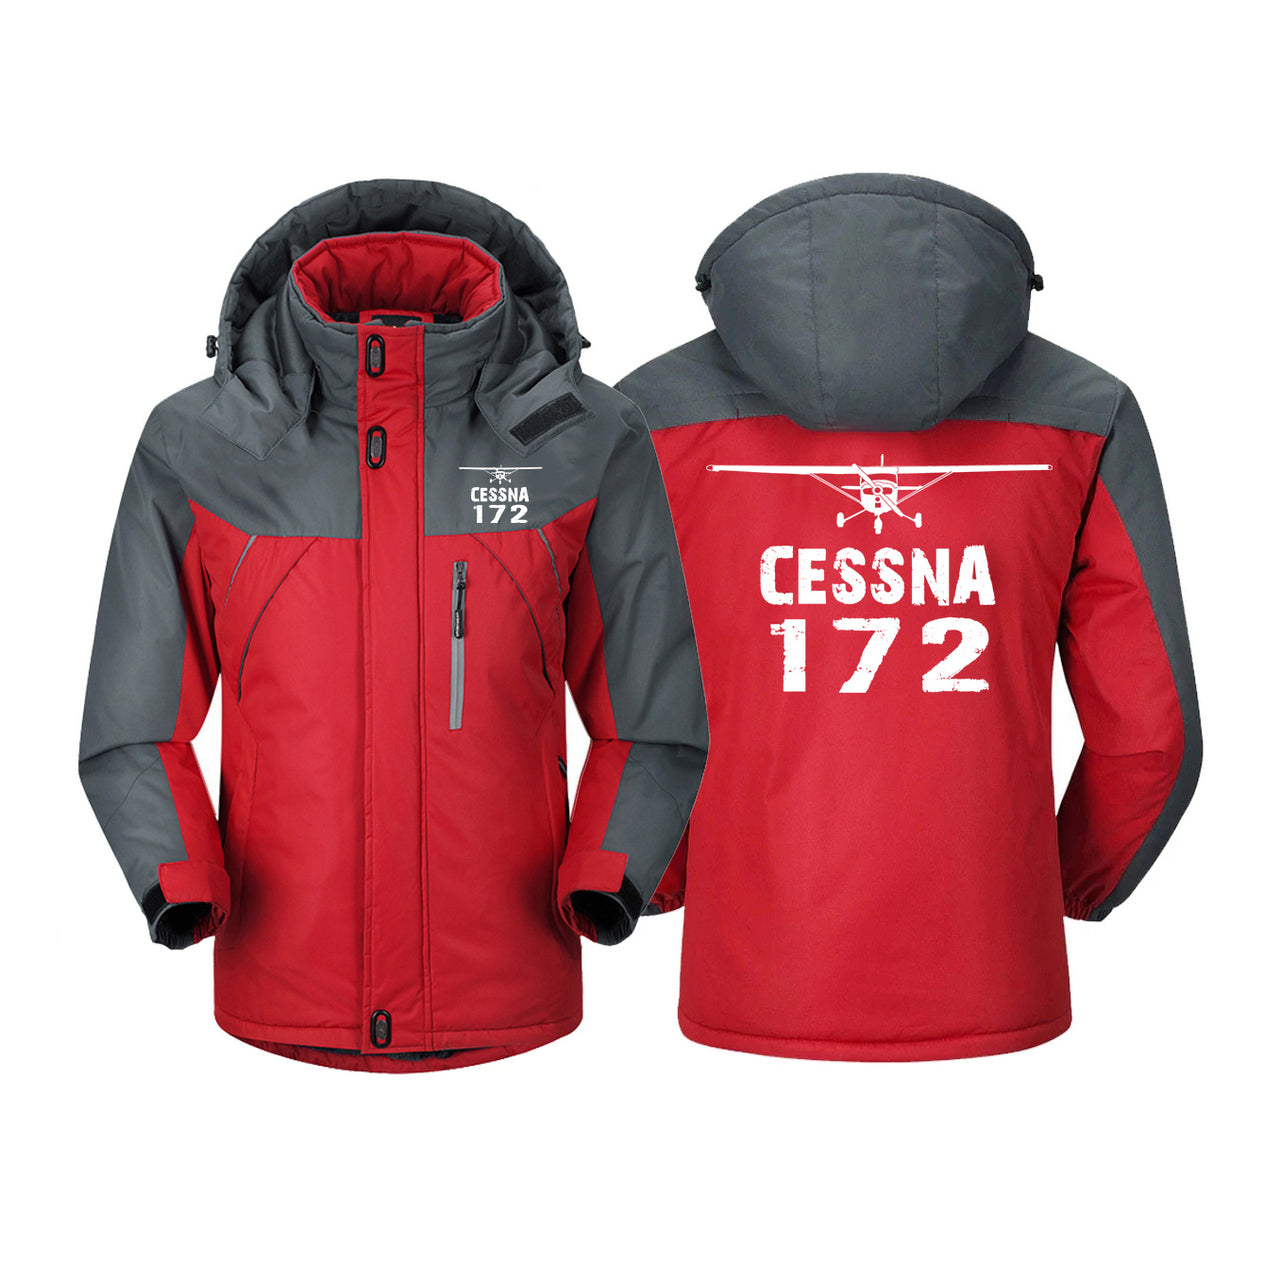 Cessna 172 & Plane Designed Thick Winter Jackets